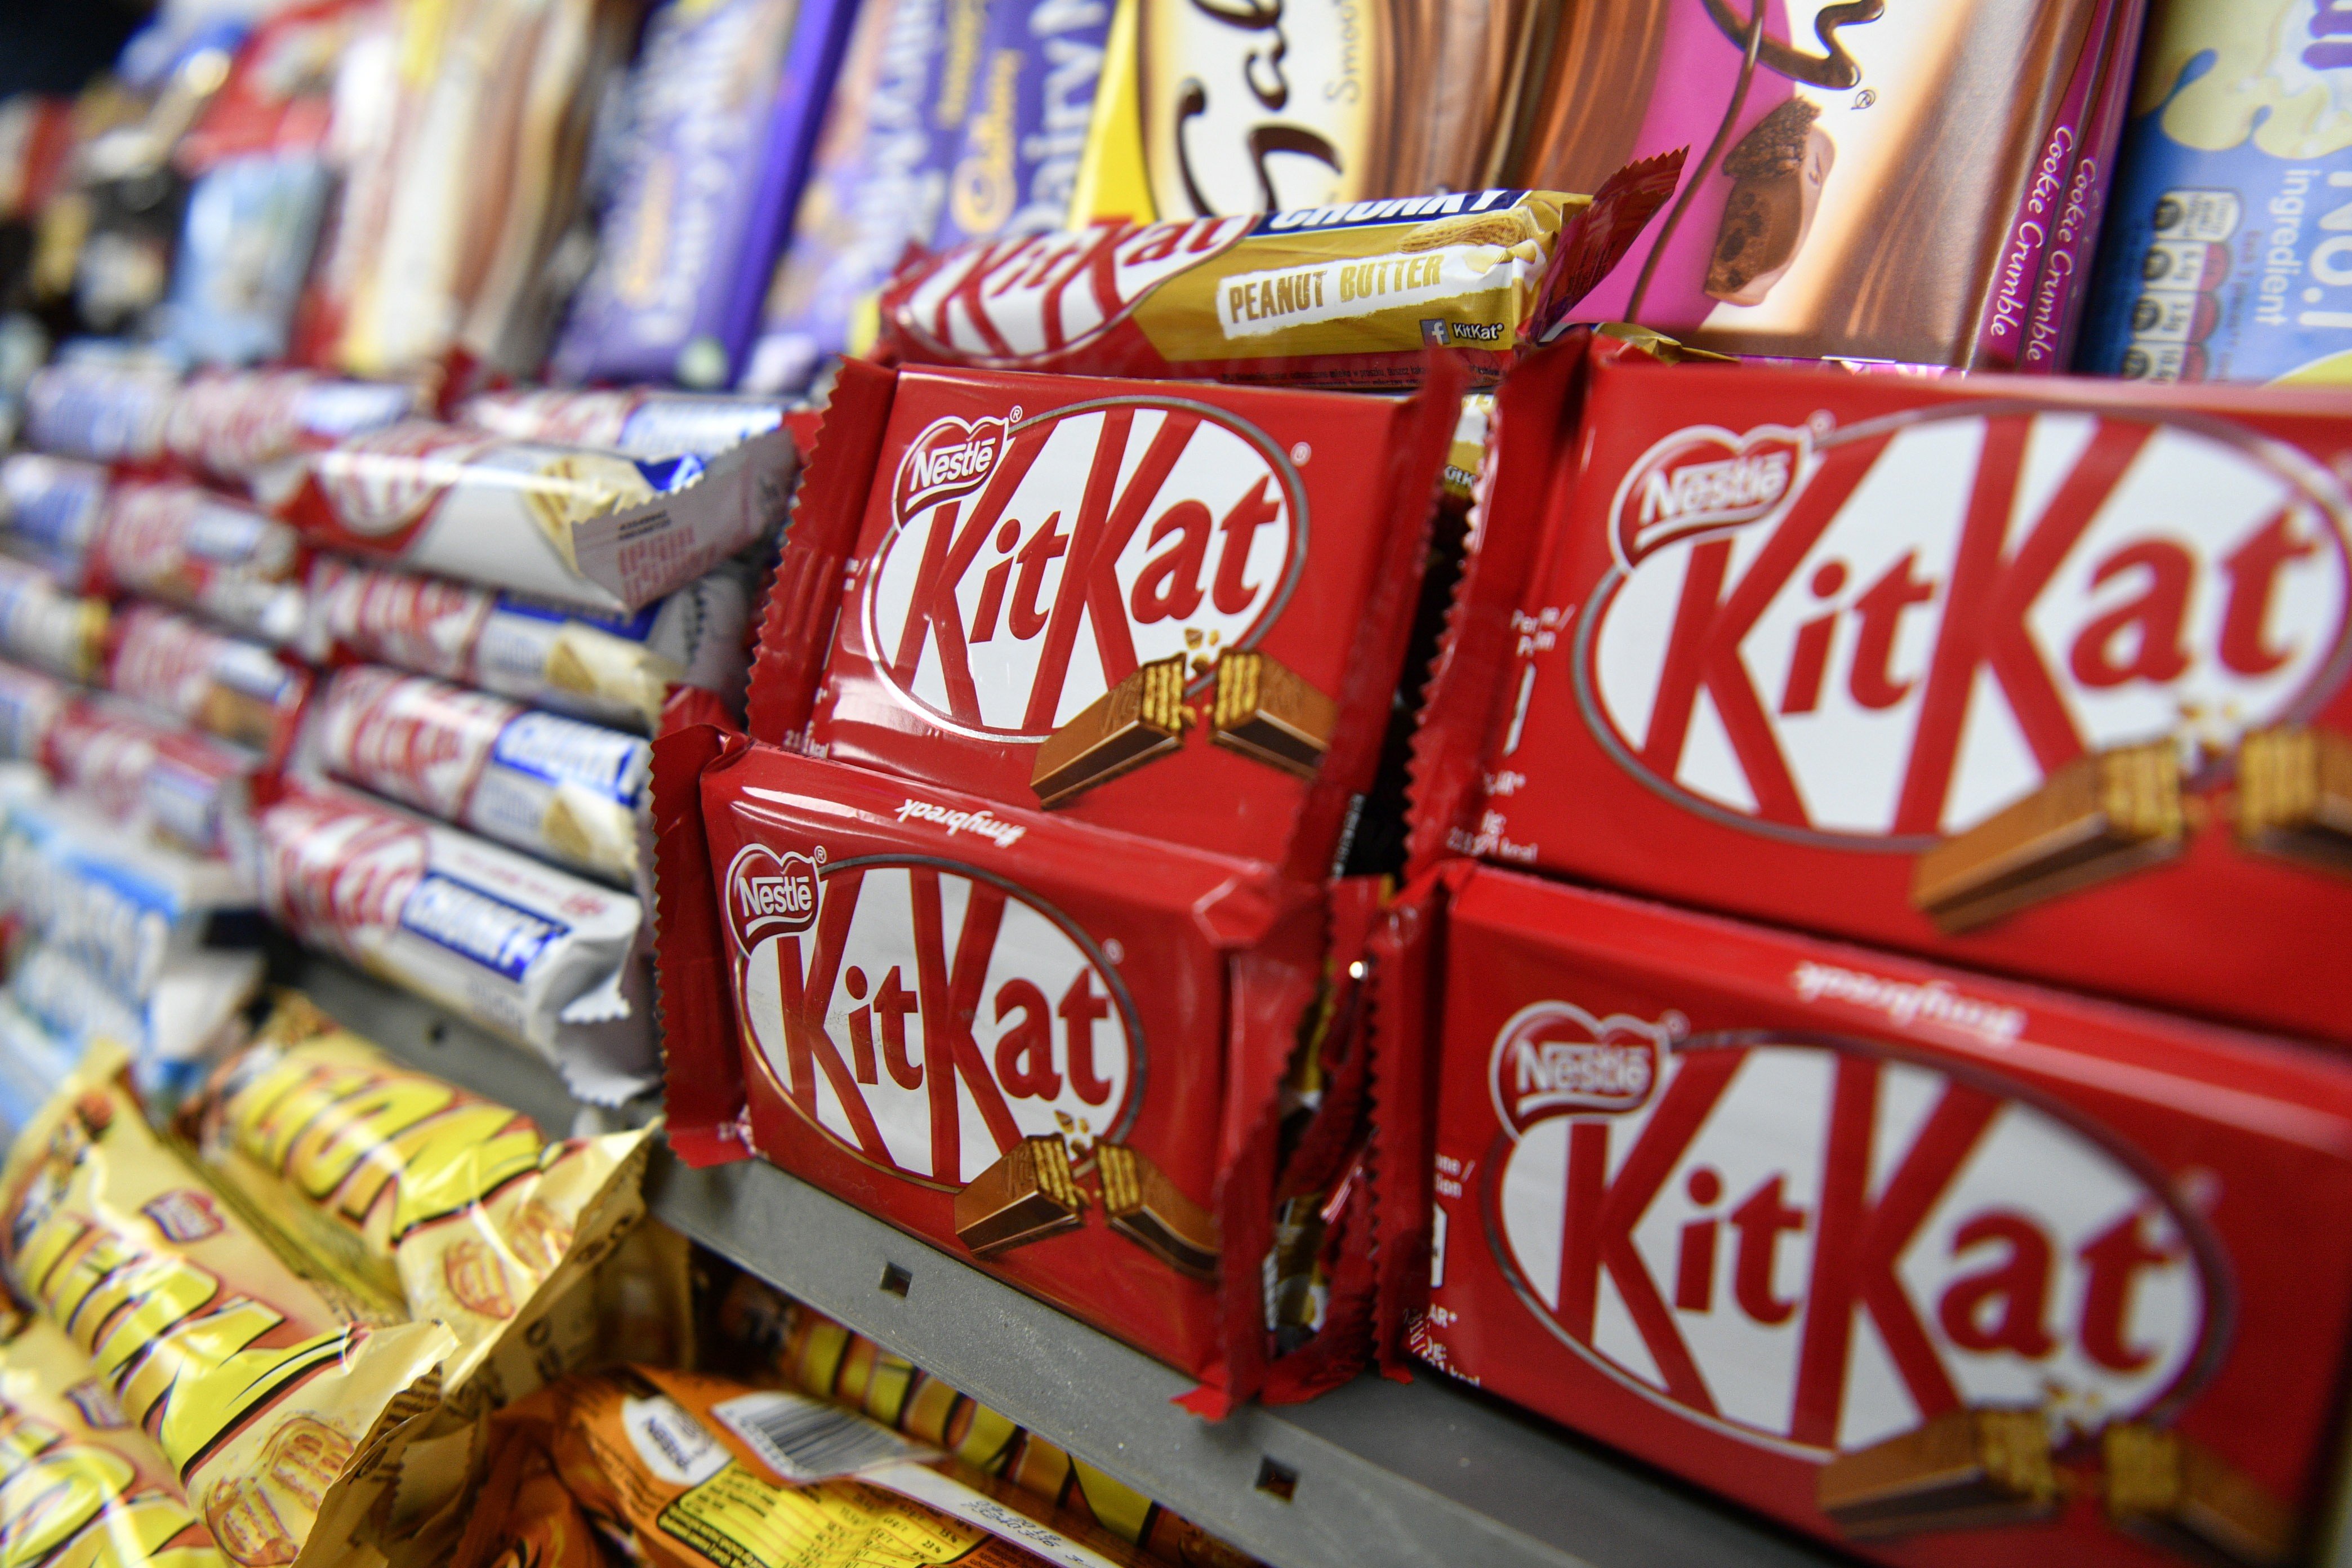 Kit Kat chocolate wafer bars on sale in London on July 25. The European Court of Justice dismissed an appeal by Nestlé to register the shape of its four-finger Kit Kat as its trademark. Photo: EPA-EFE